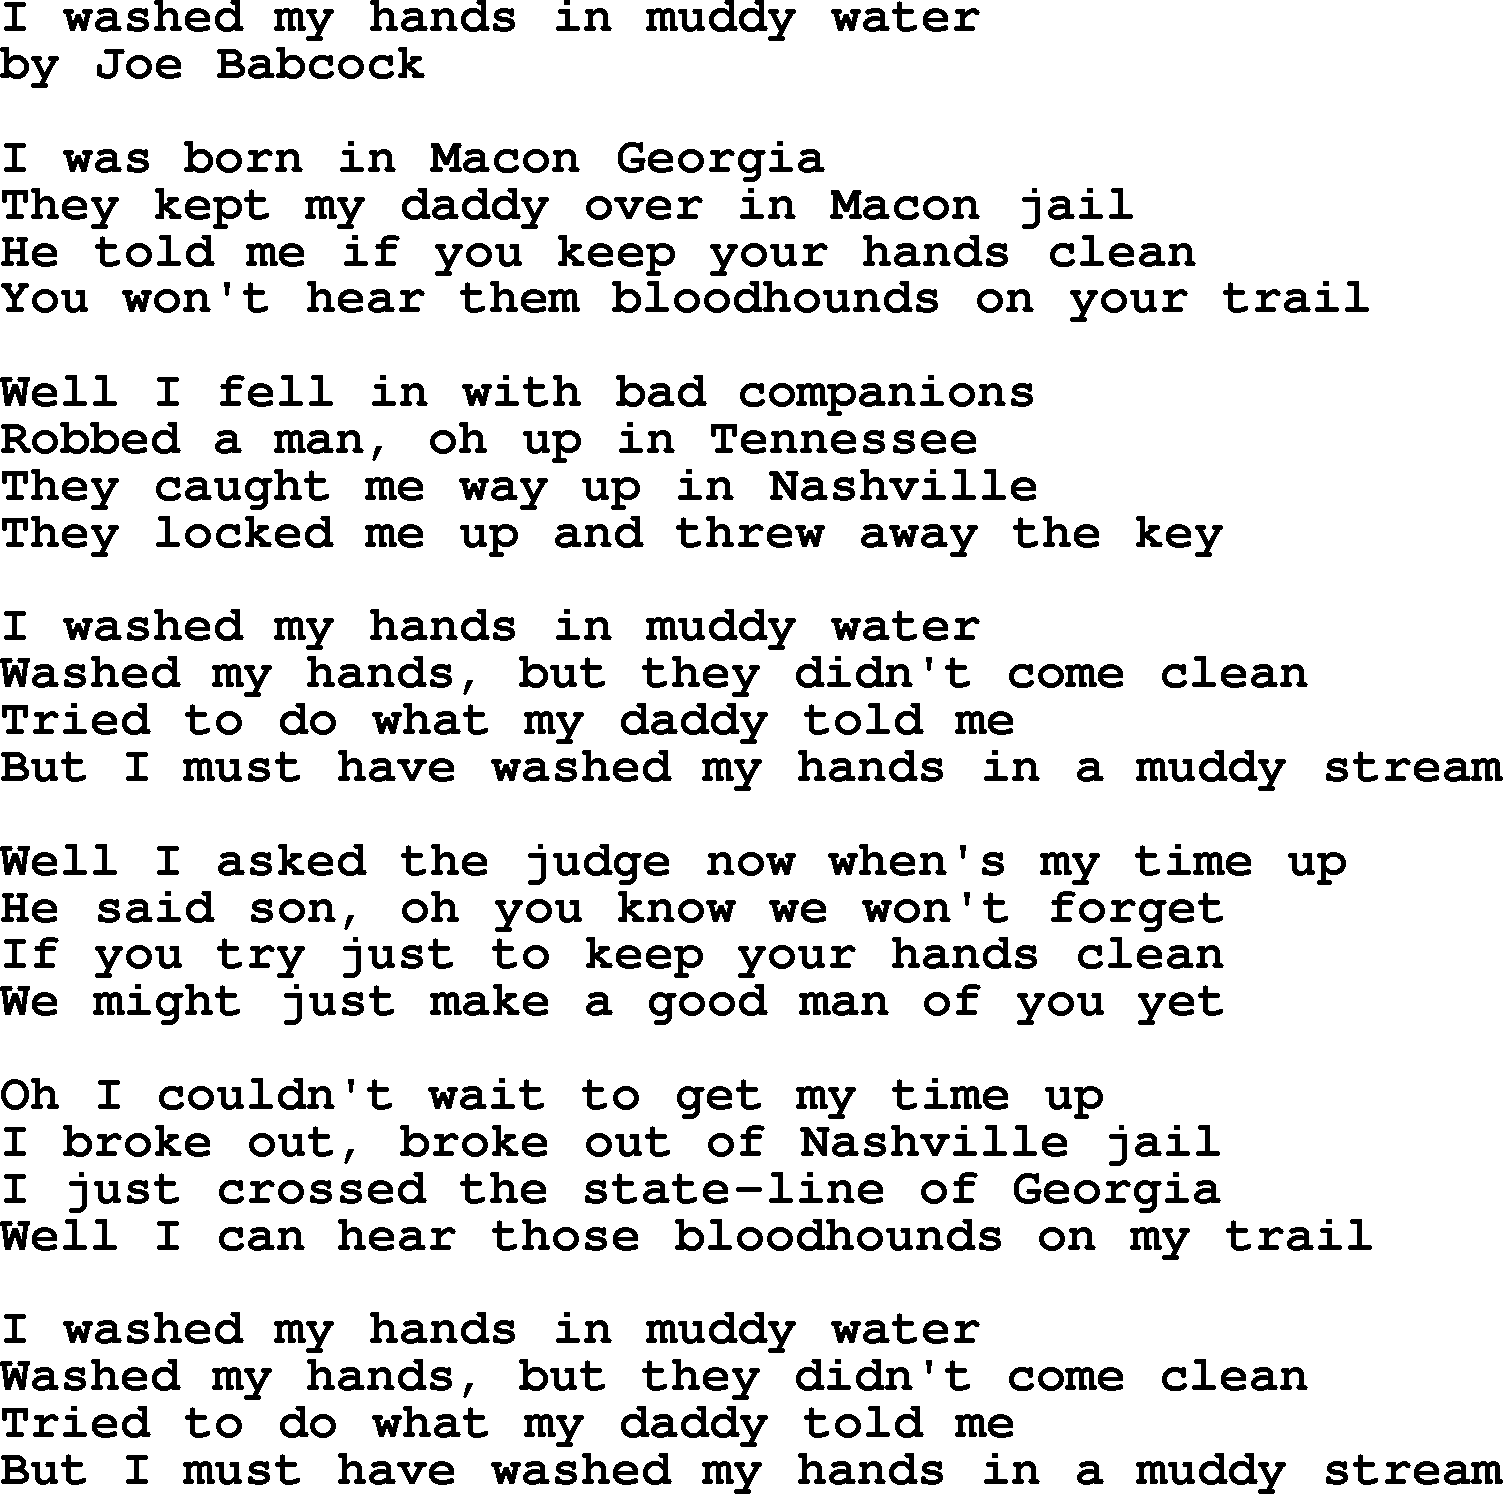 The Byrds song I Washed My Hands In Muddy Water, lyrics